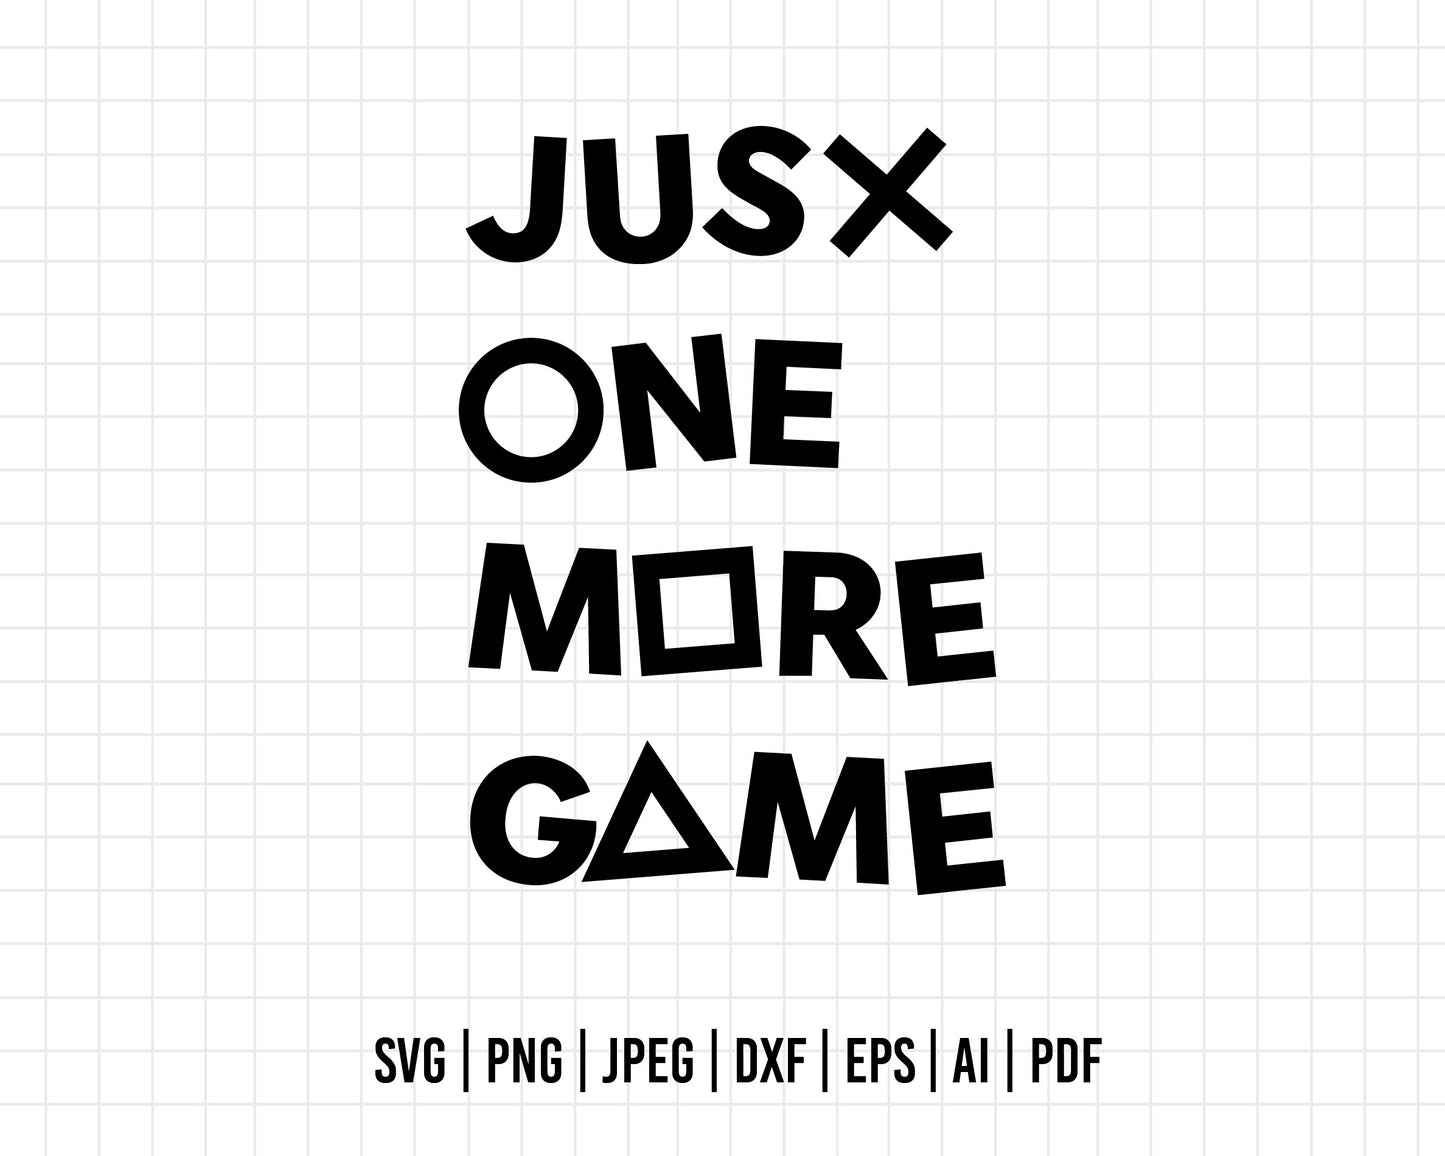 COD182- Just one more game svg, Playstation Buttons SVG, Playstation, Suitable for Silhouette, Cricut, Laser Cutter & Crafting svg